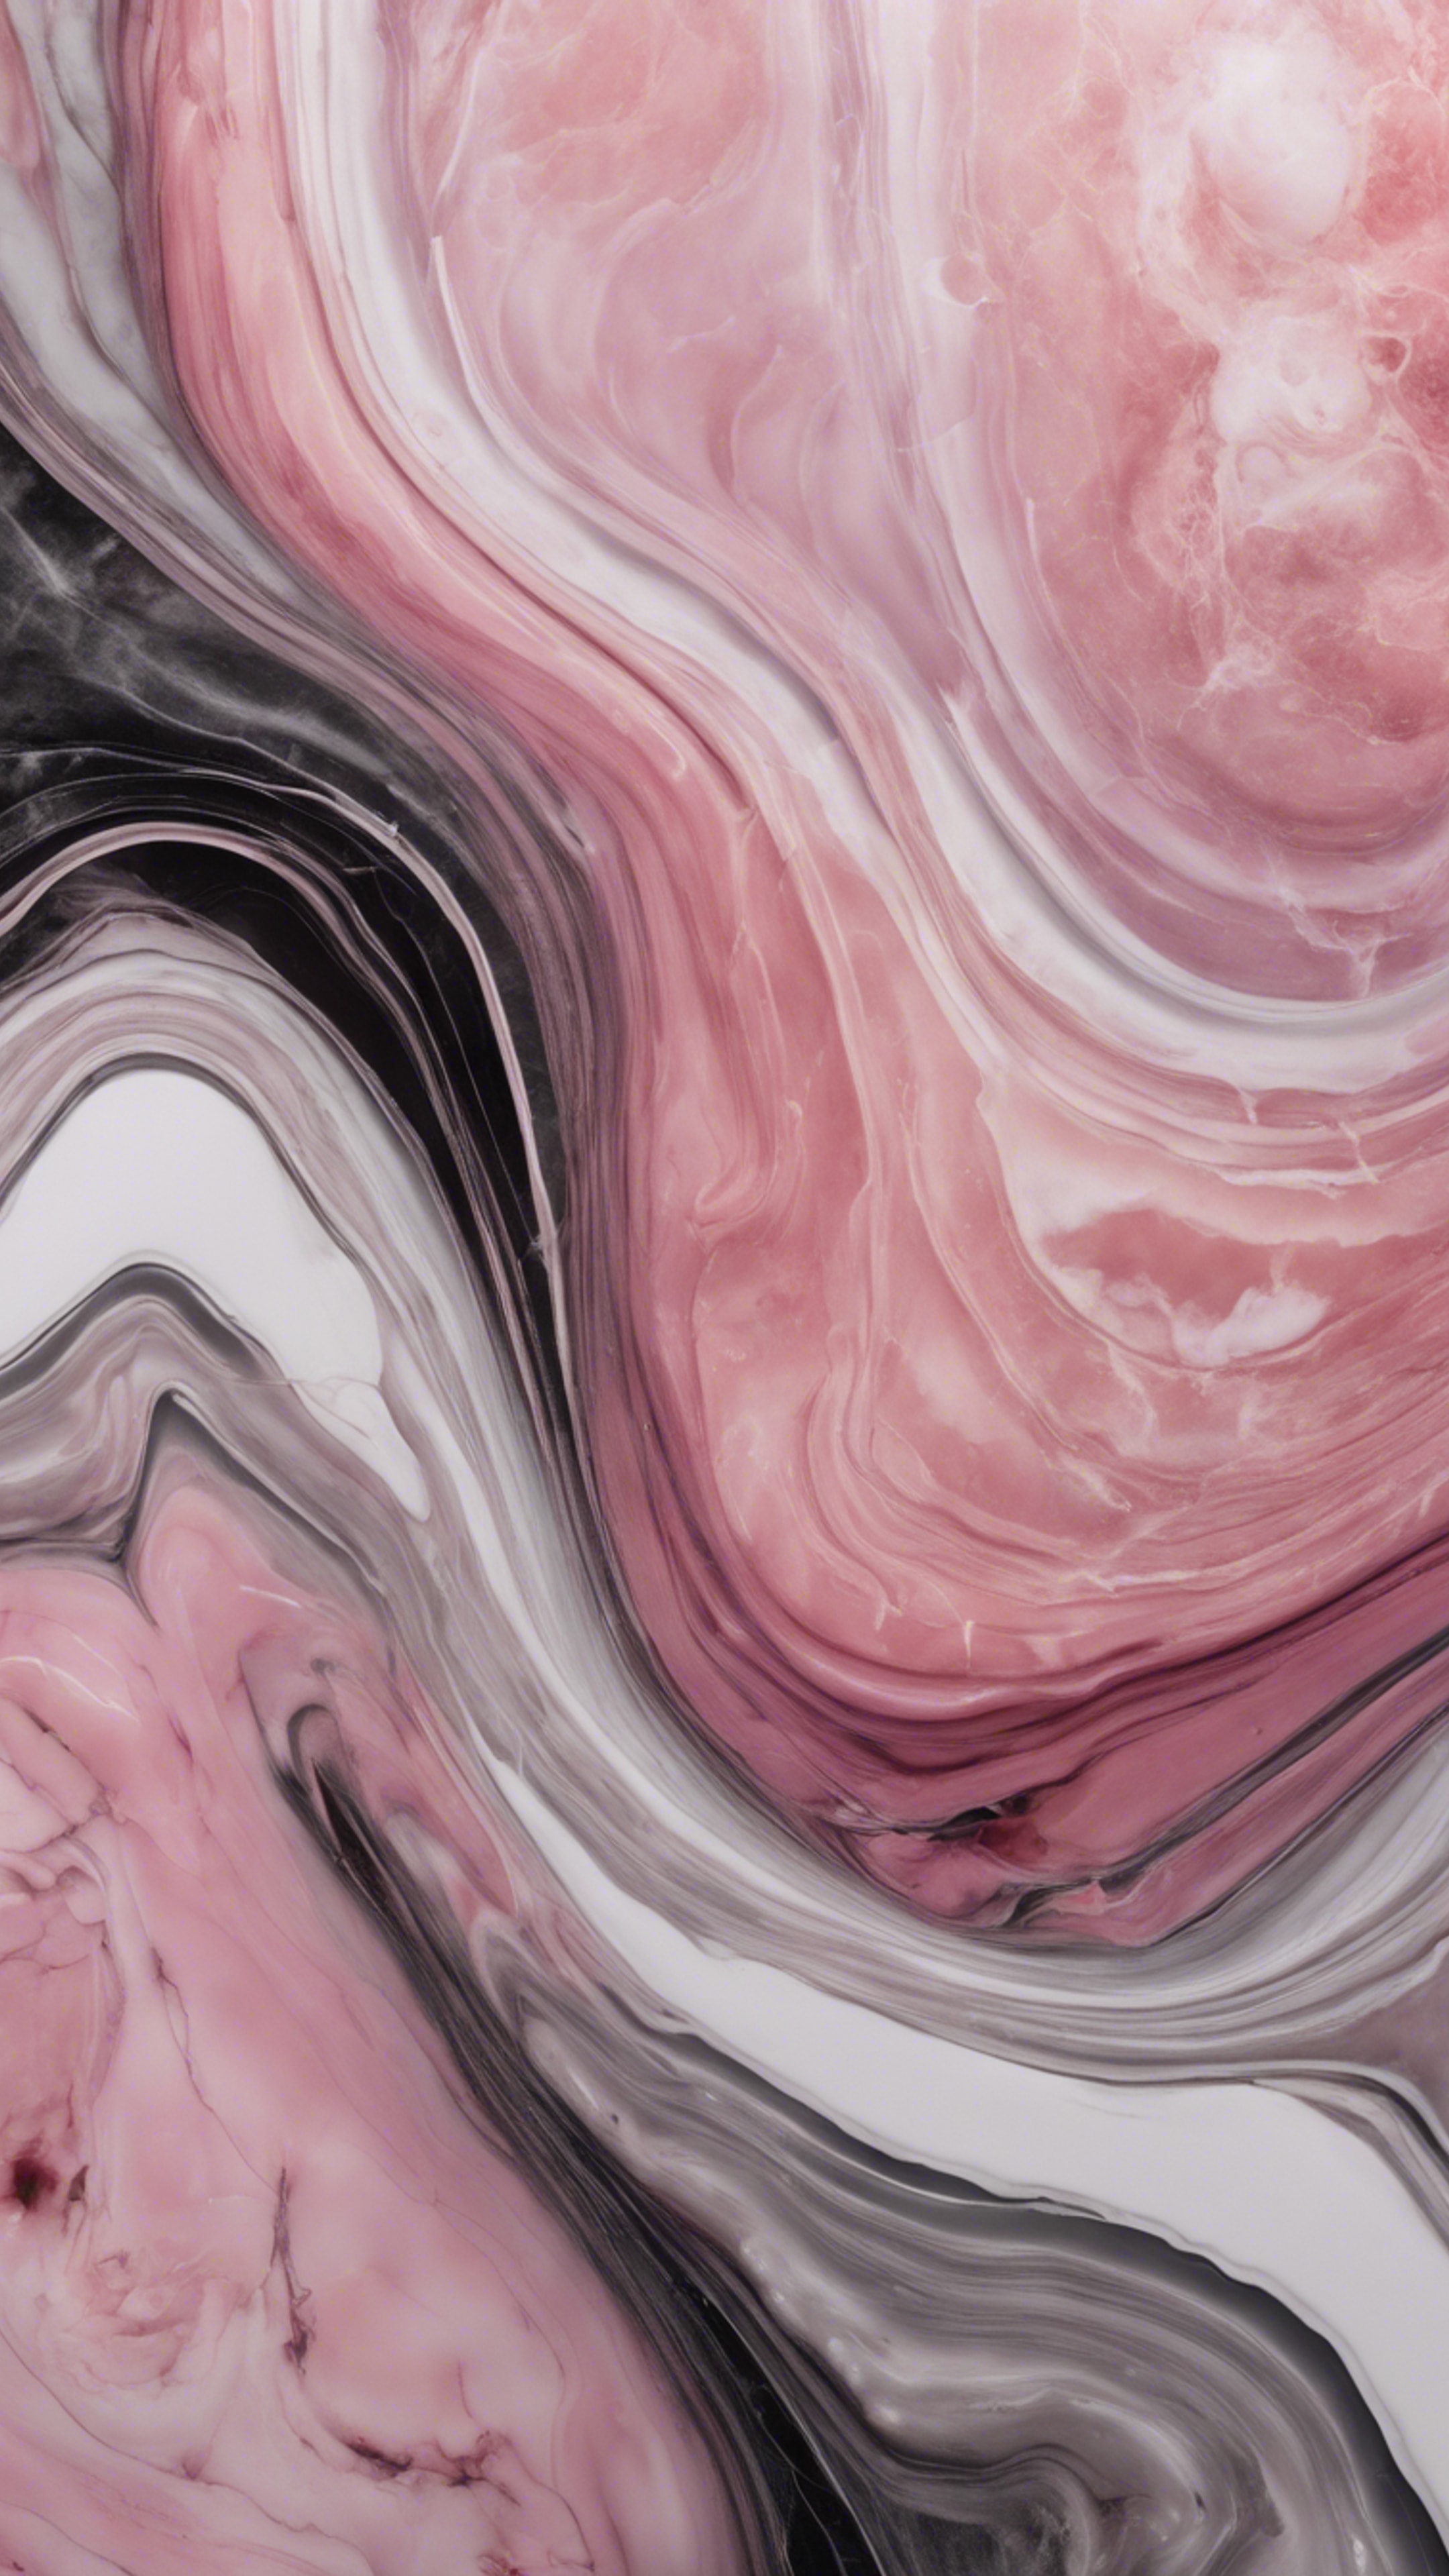 An abstract representation of pink marble, incorporating waves of deep pinks, soft whites, and dark greys.壁紙[5ac081f457bf4dc8ac1f]